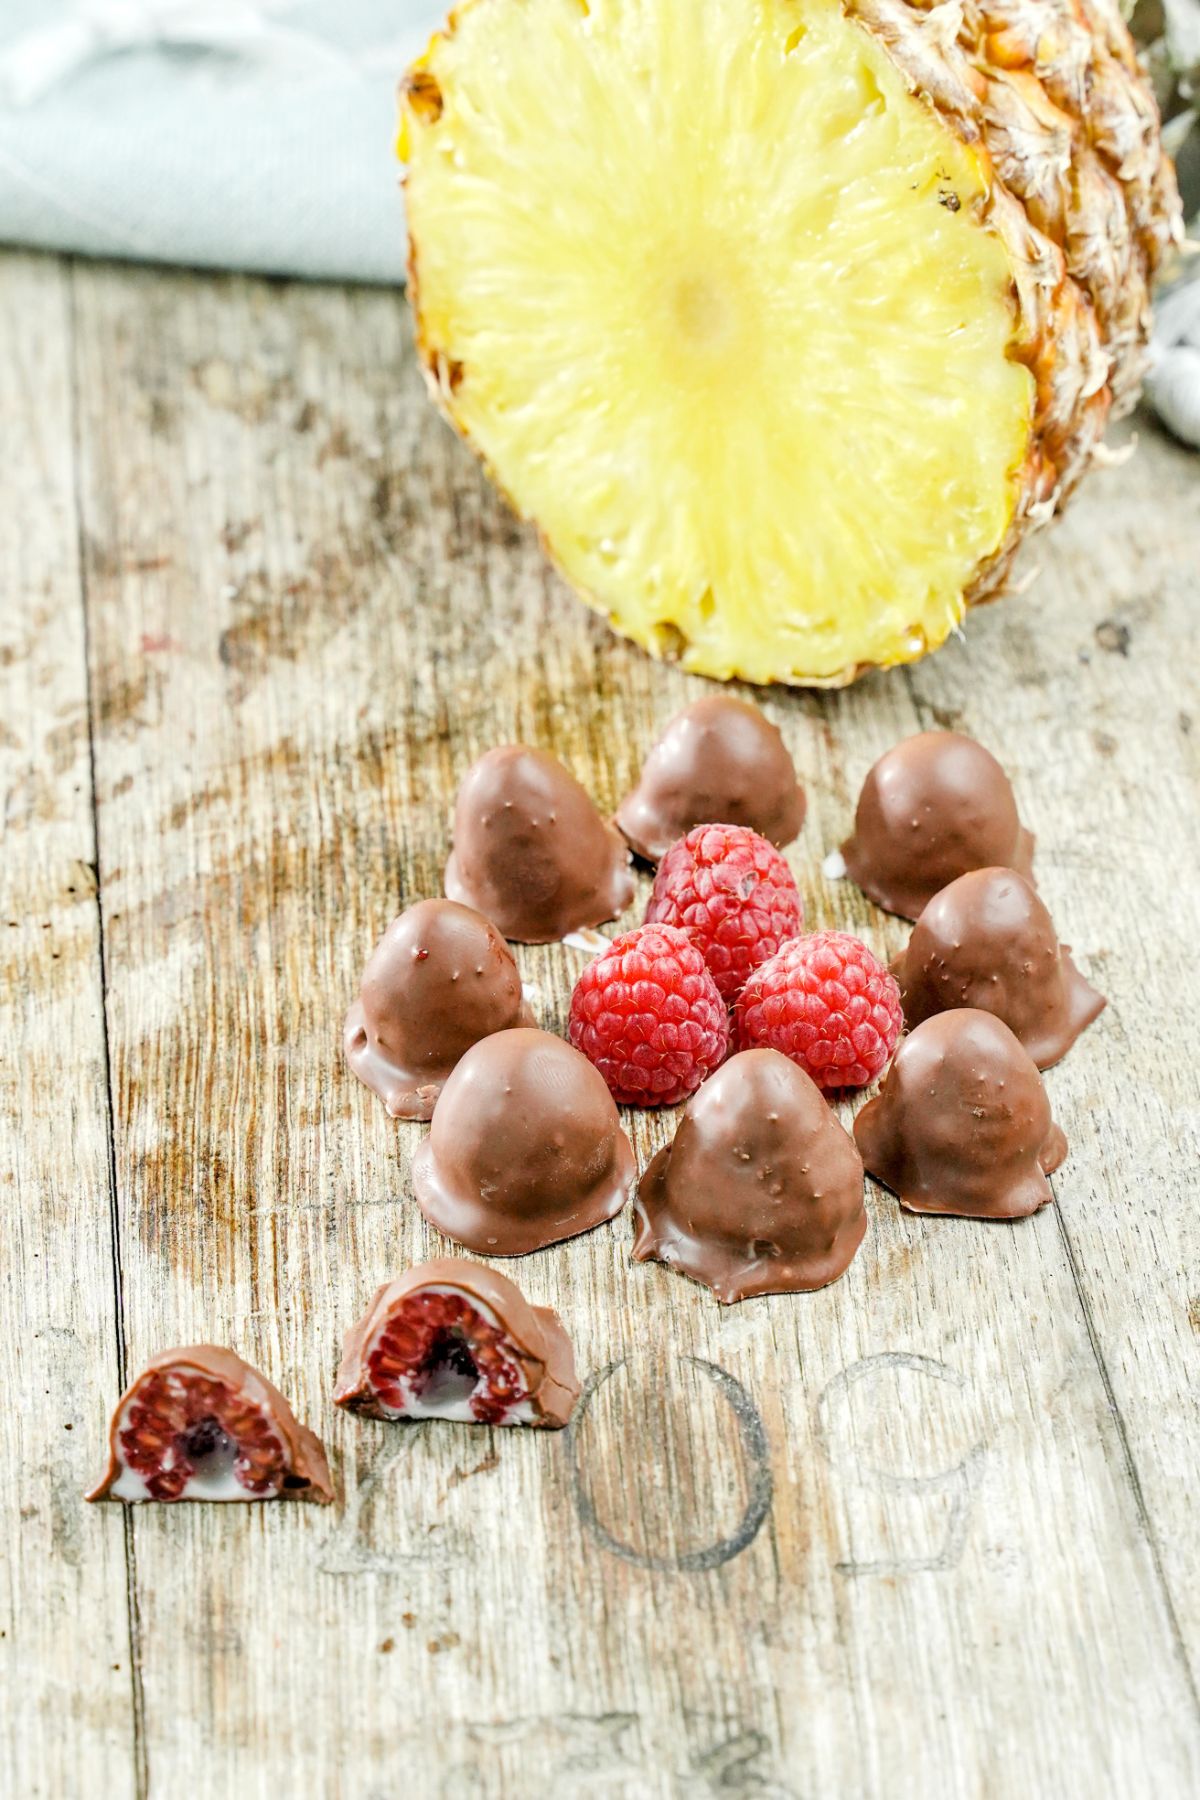 4 Ingredient Chocolate-Dipped Raspberries served in a circle